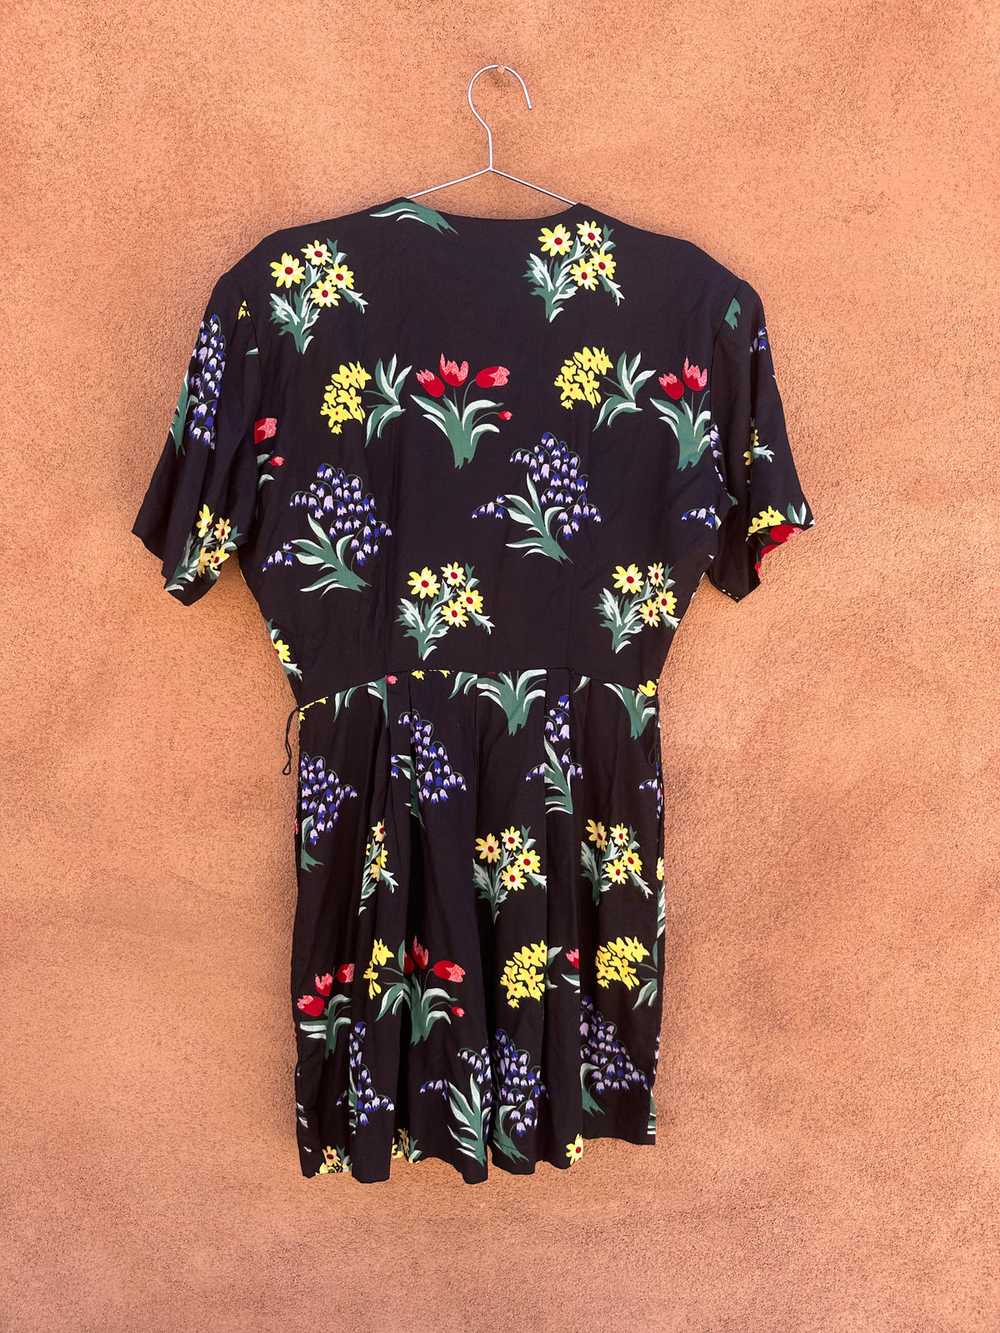 Floral Rayon Romper - Erika's Place - image 2